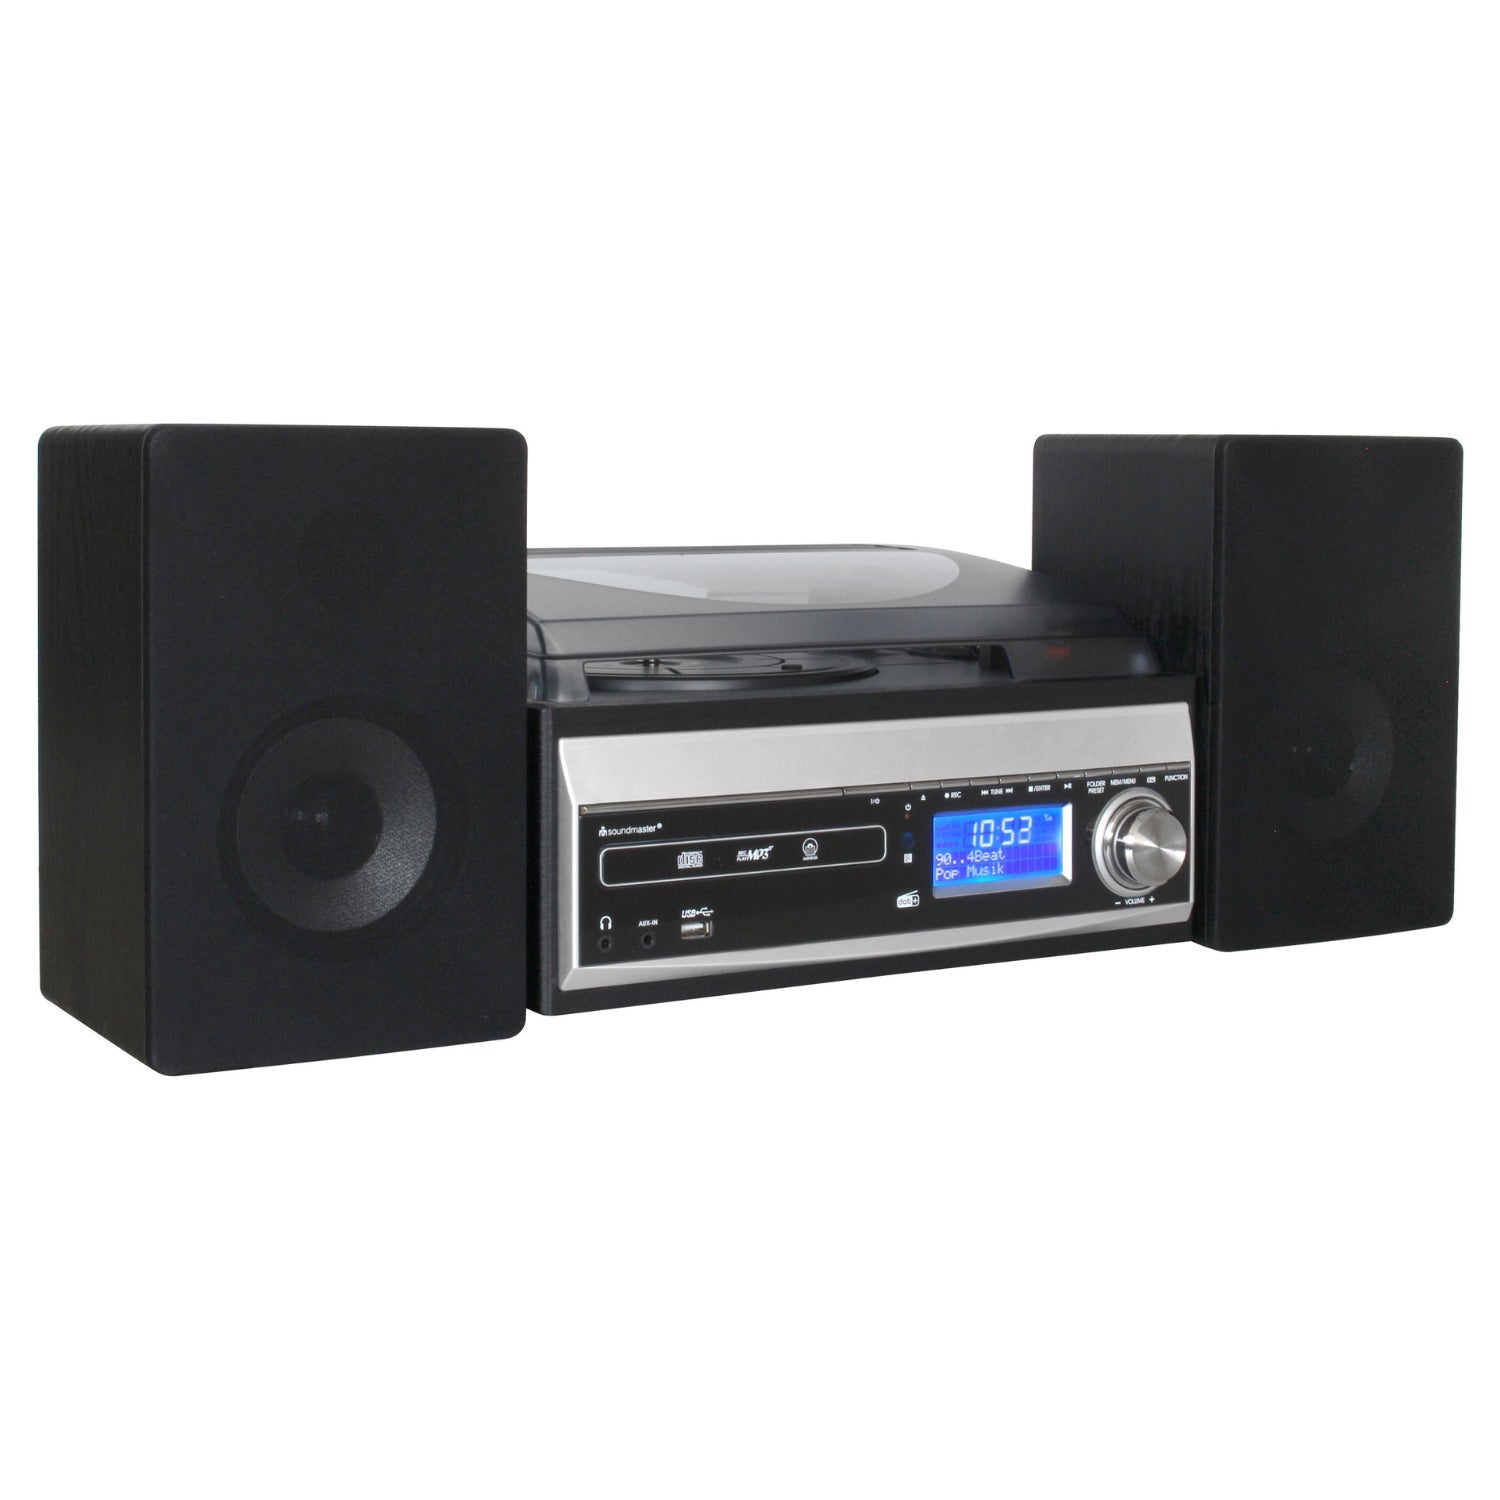 Soundmaster MCD1820SW DAB+ stereo system compact system CD player turntable USB SD encoding MP3